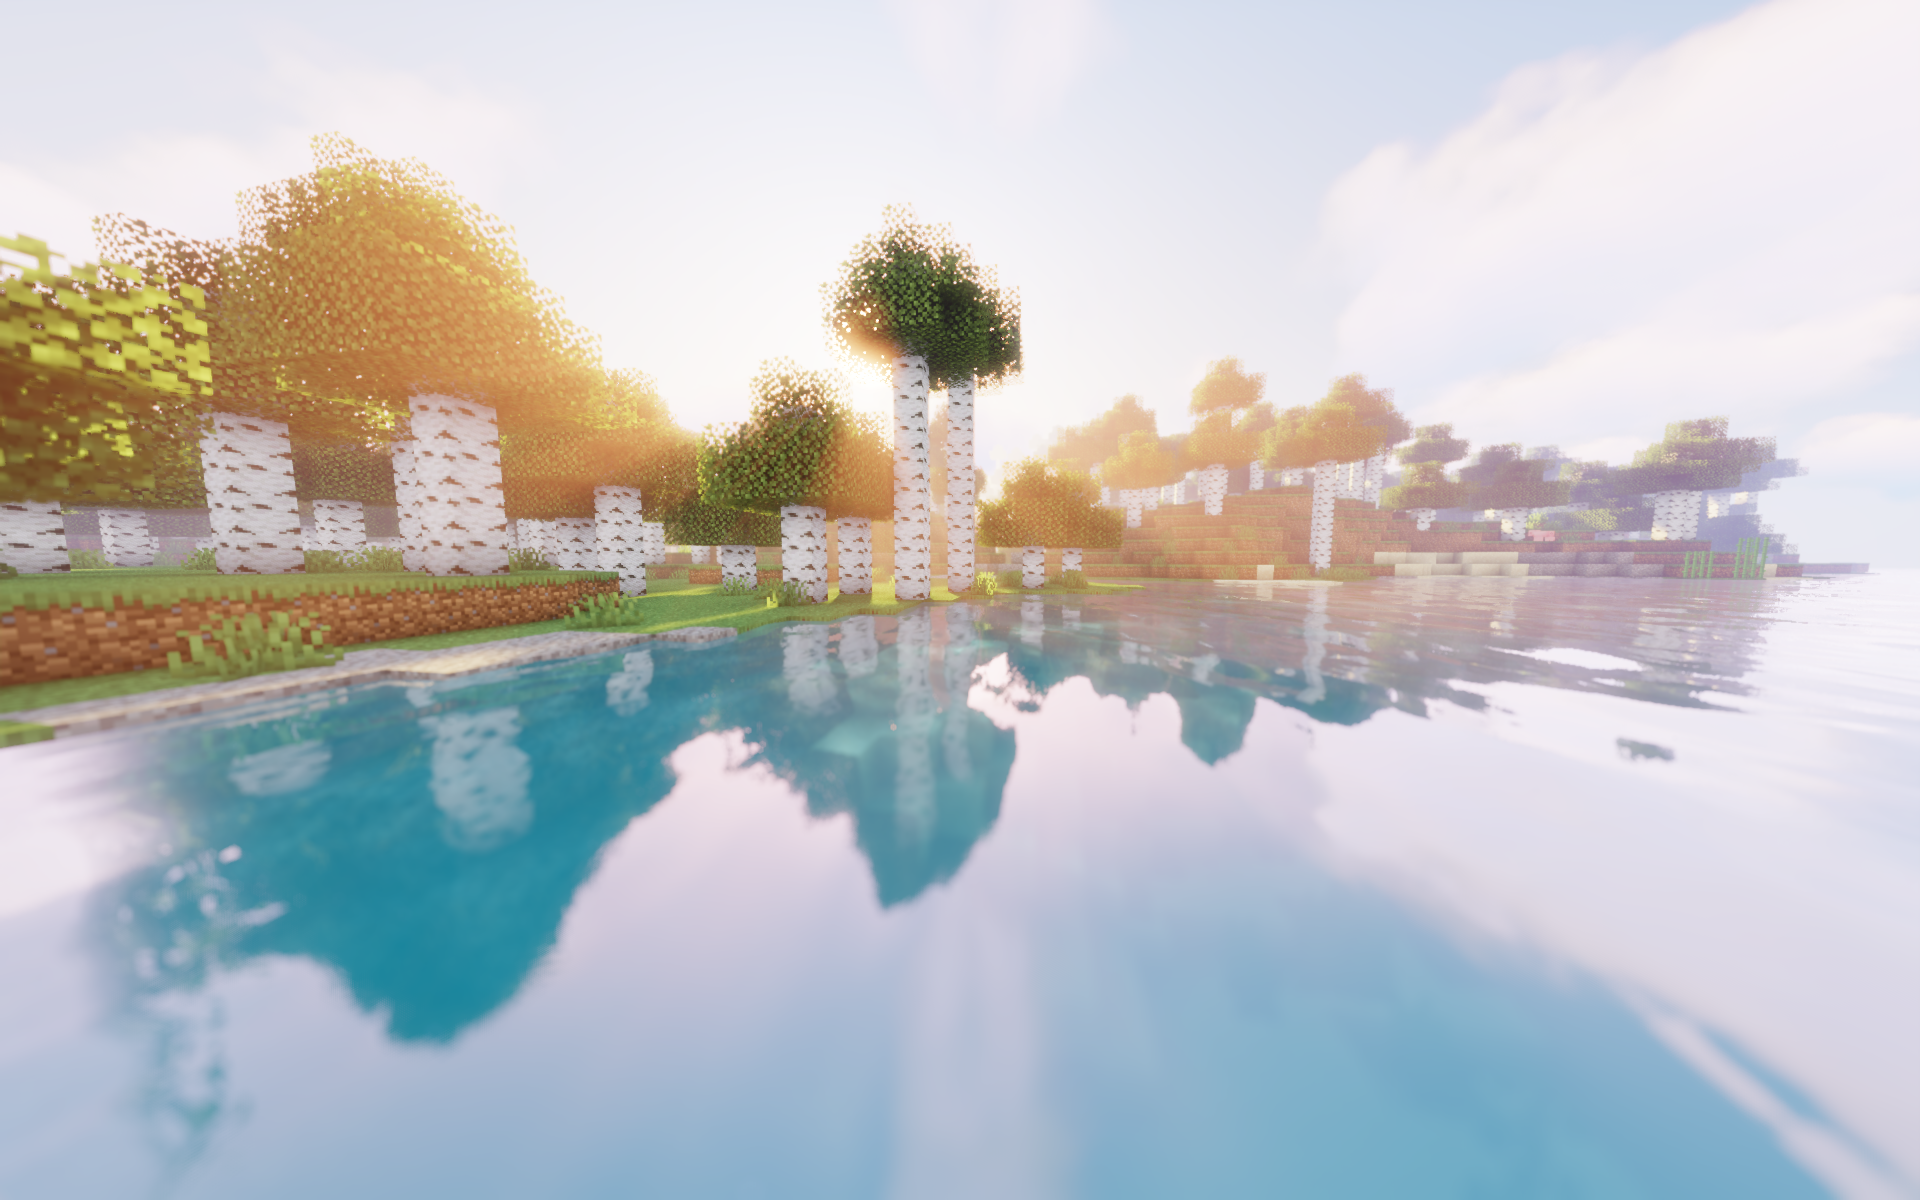 General 1920x1200 Minecraft shaders video games CGI video game art cube water trees sky clouds nature reflection screen shot